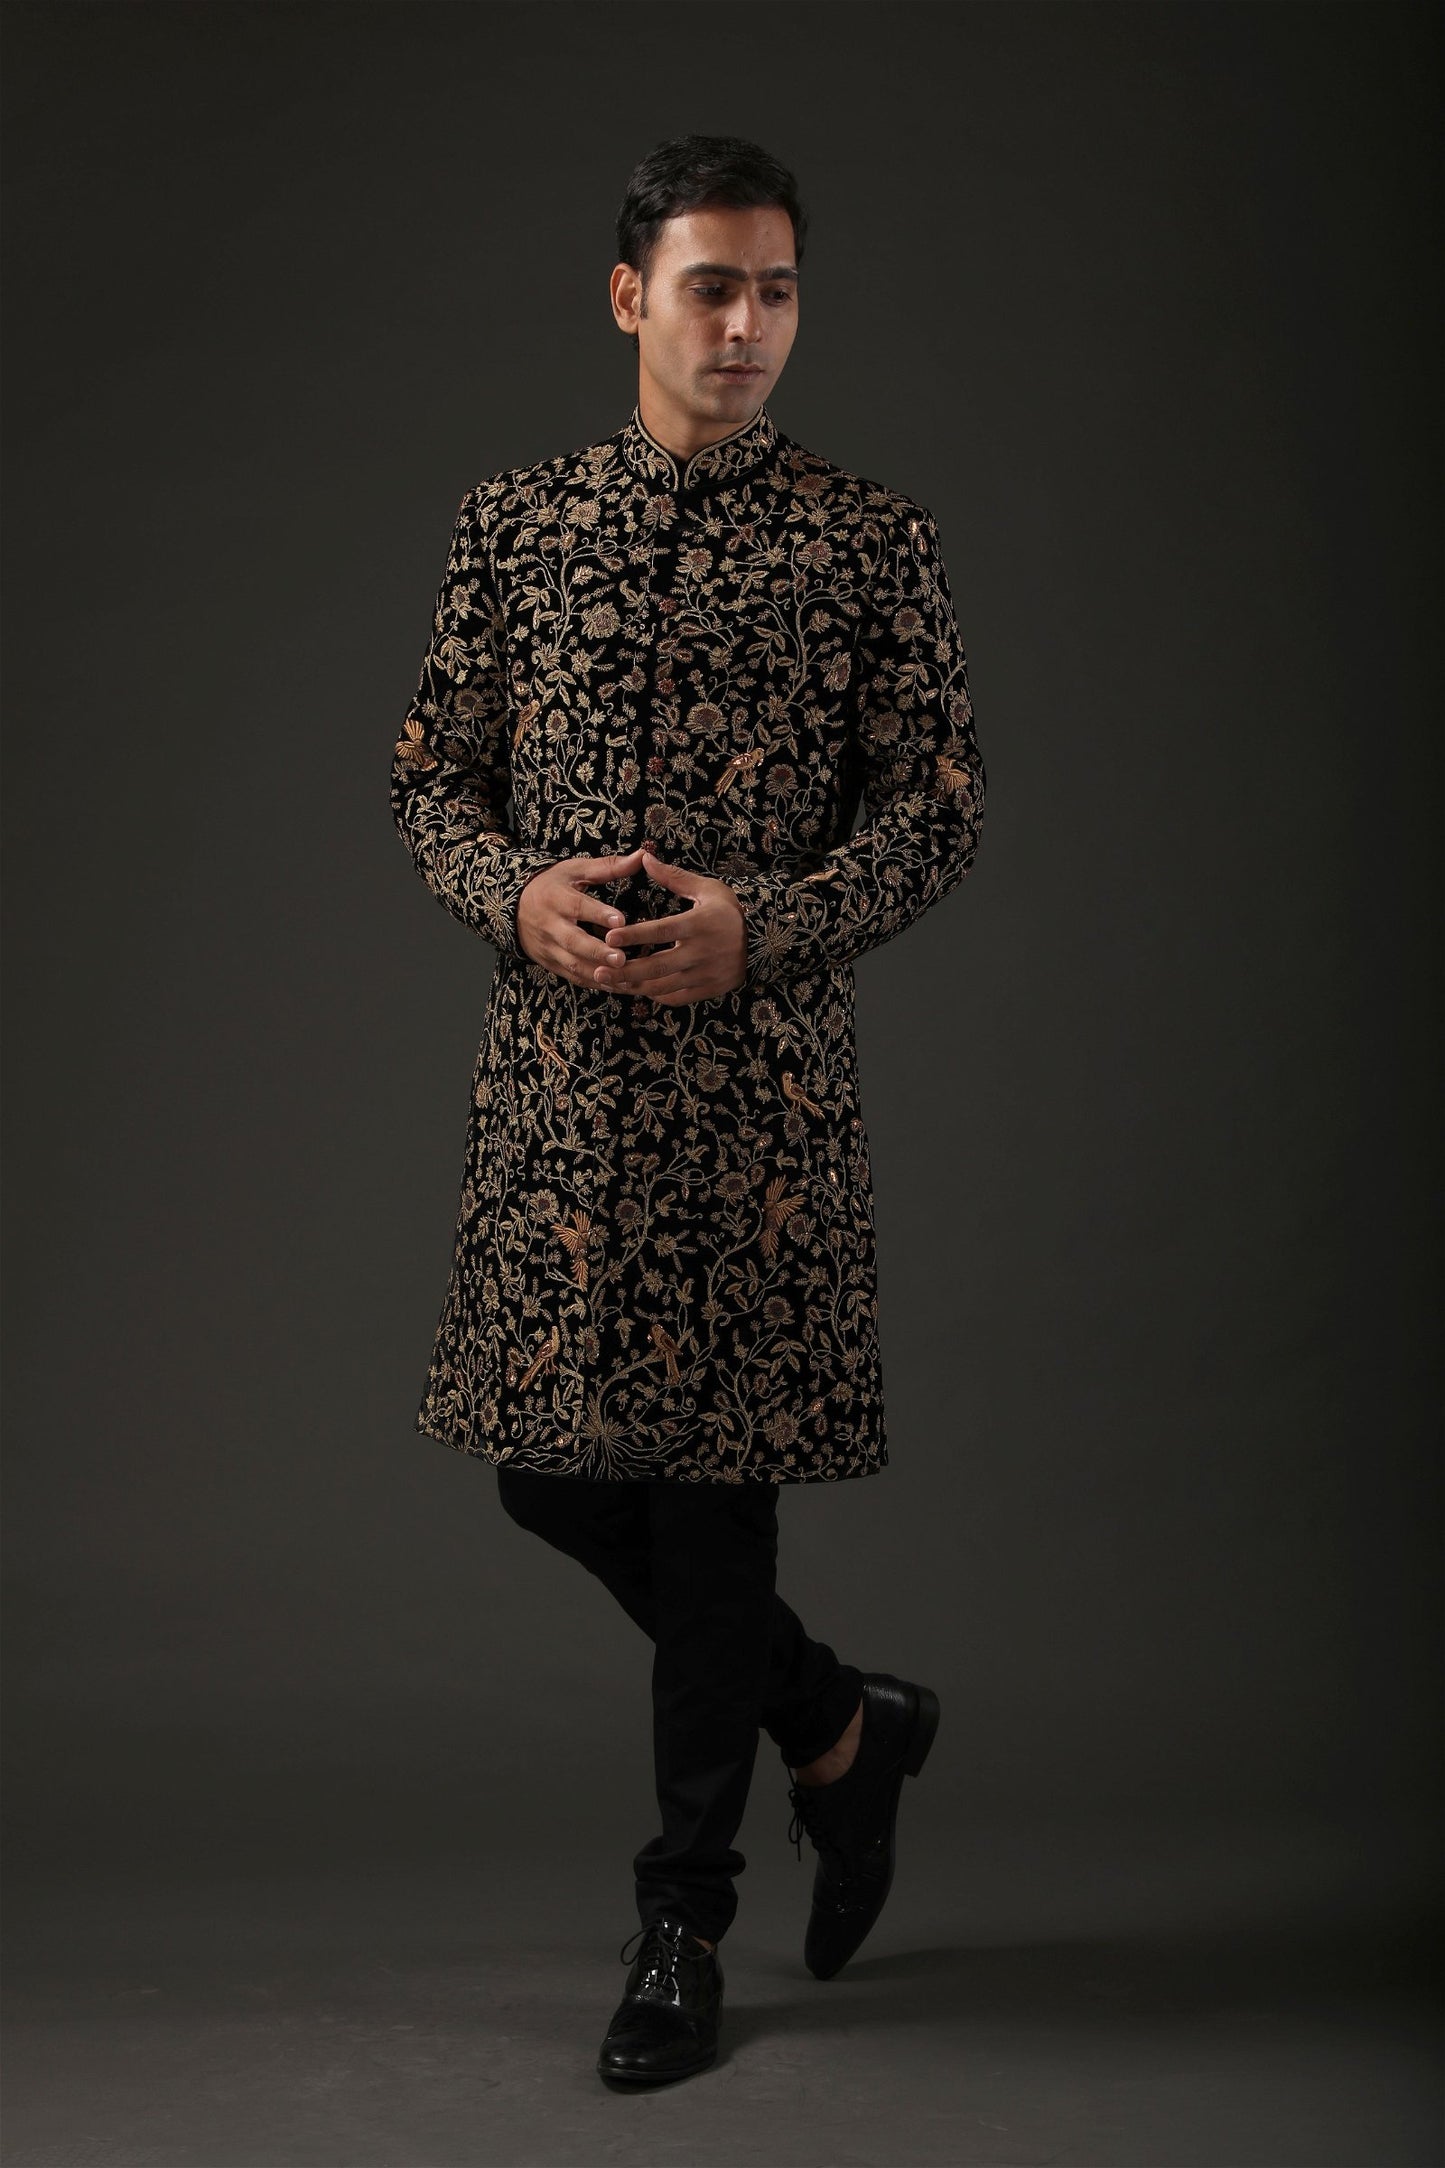 Immerse yourself in the sophistication of groom sherwanis, from the distinguished black sherwani with a red kulla to the classic groom black sherwani.